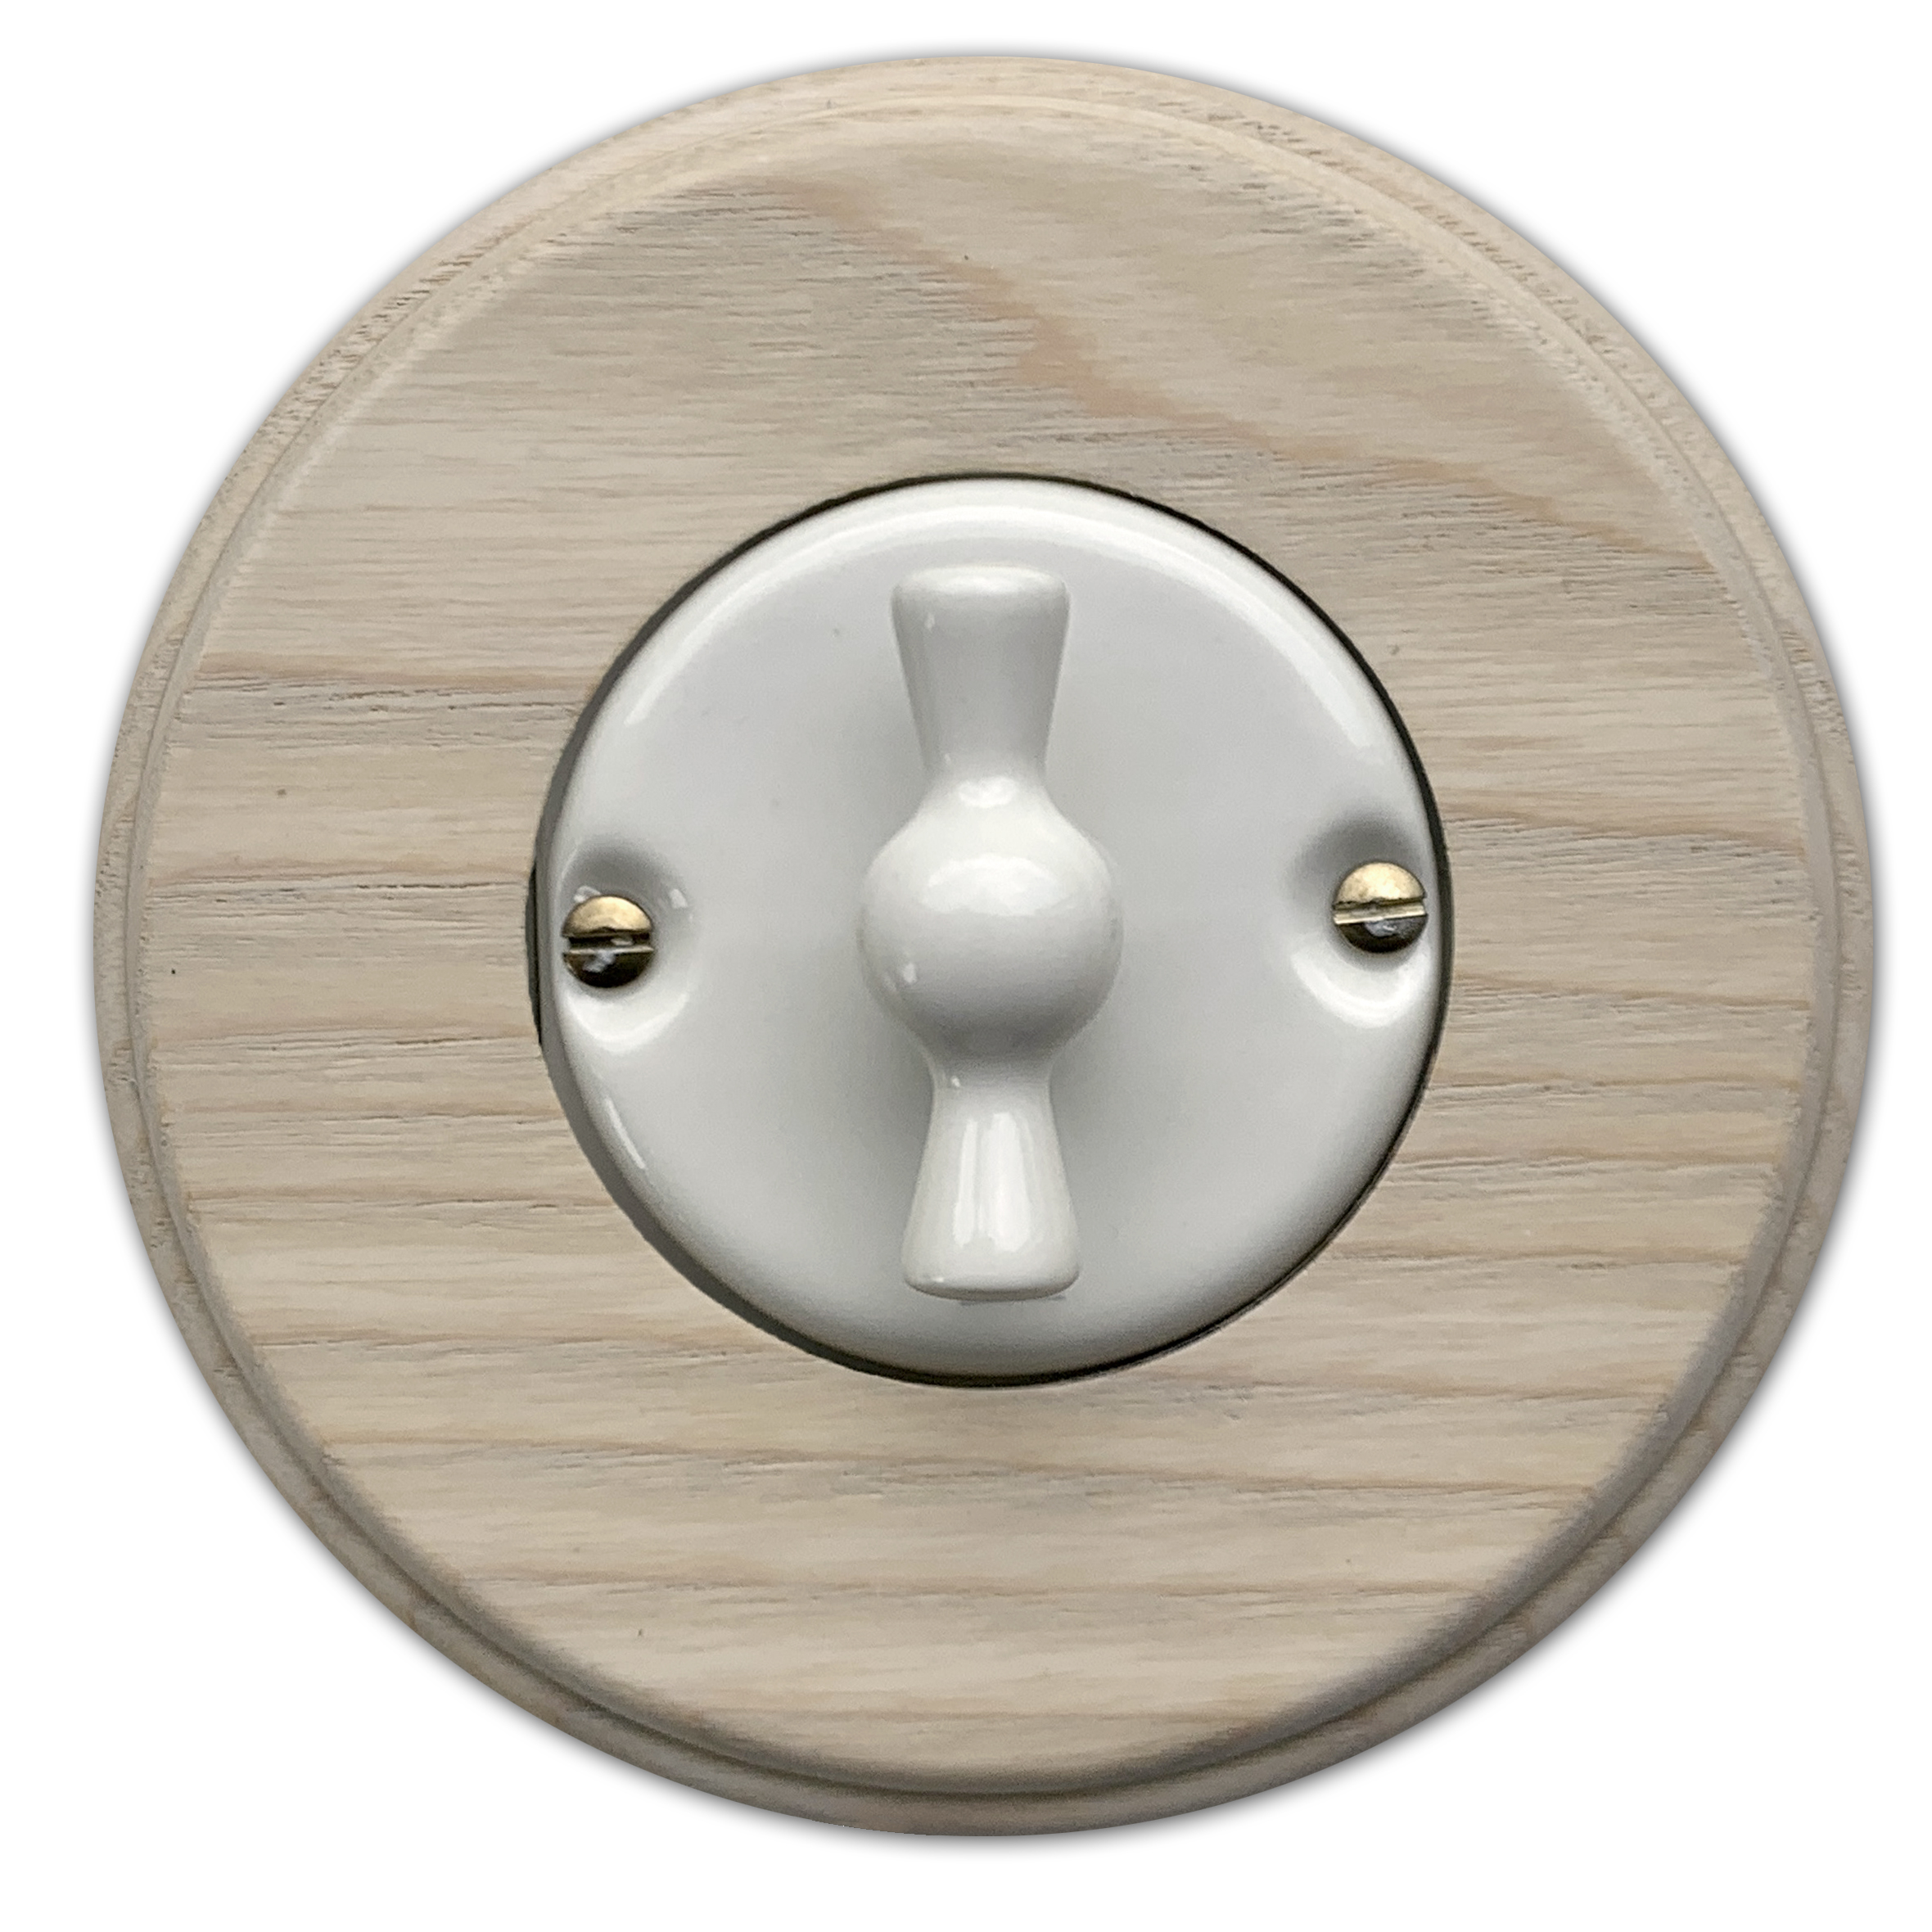 Rotary light switch 1-fold ARREDA Butterfly ON-OFF change over switch. Porcelain dove gray.